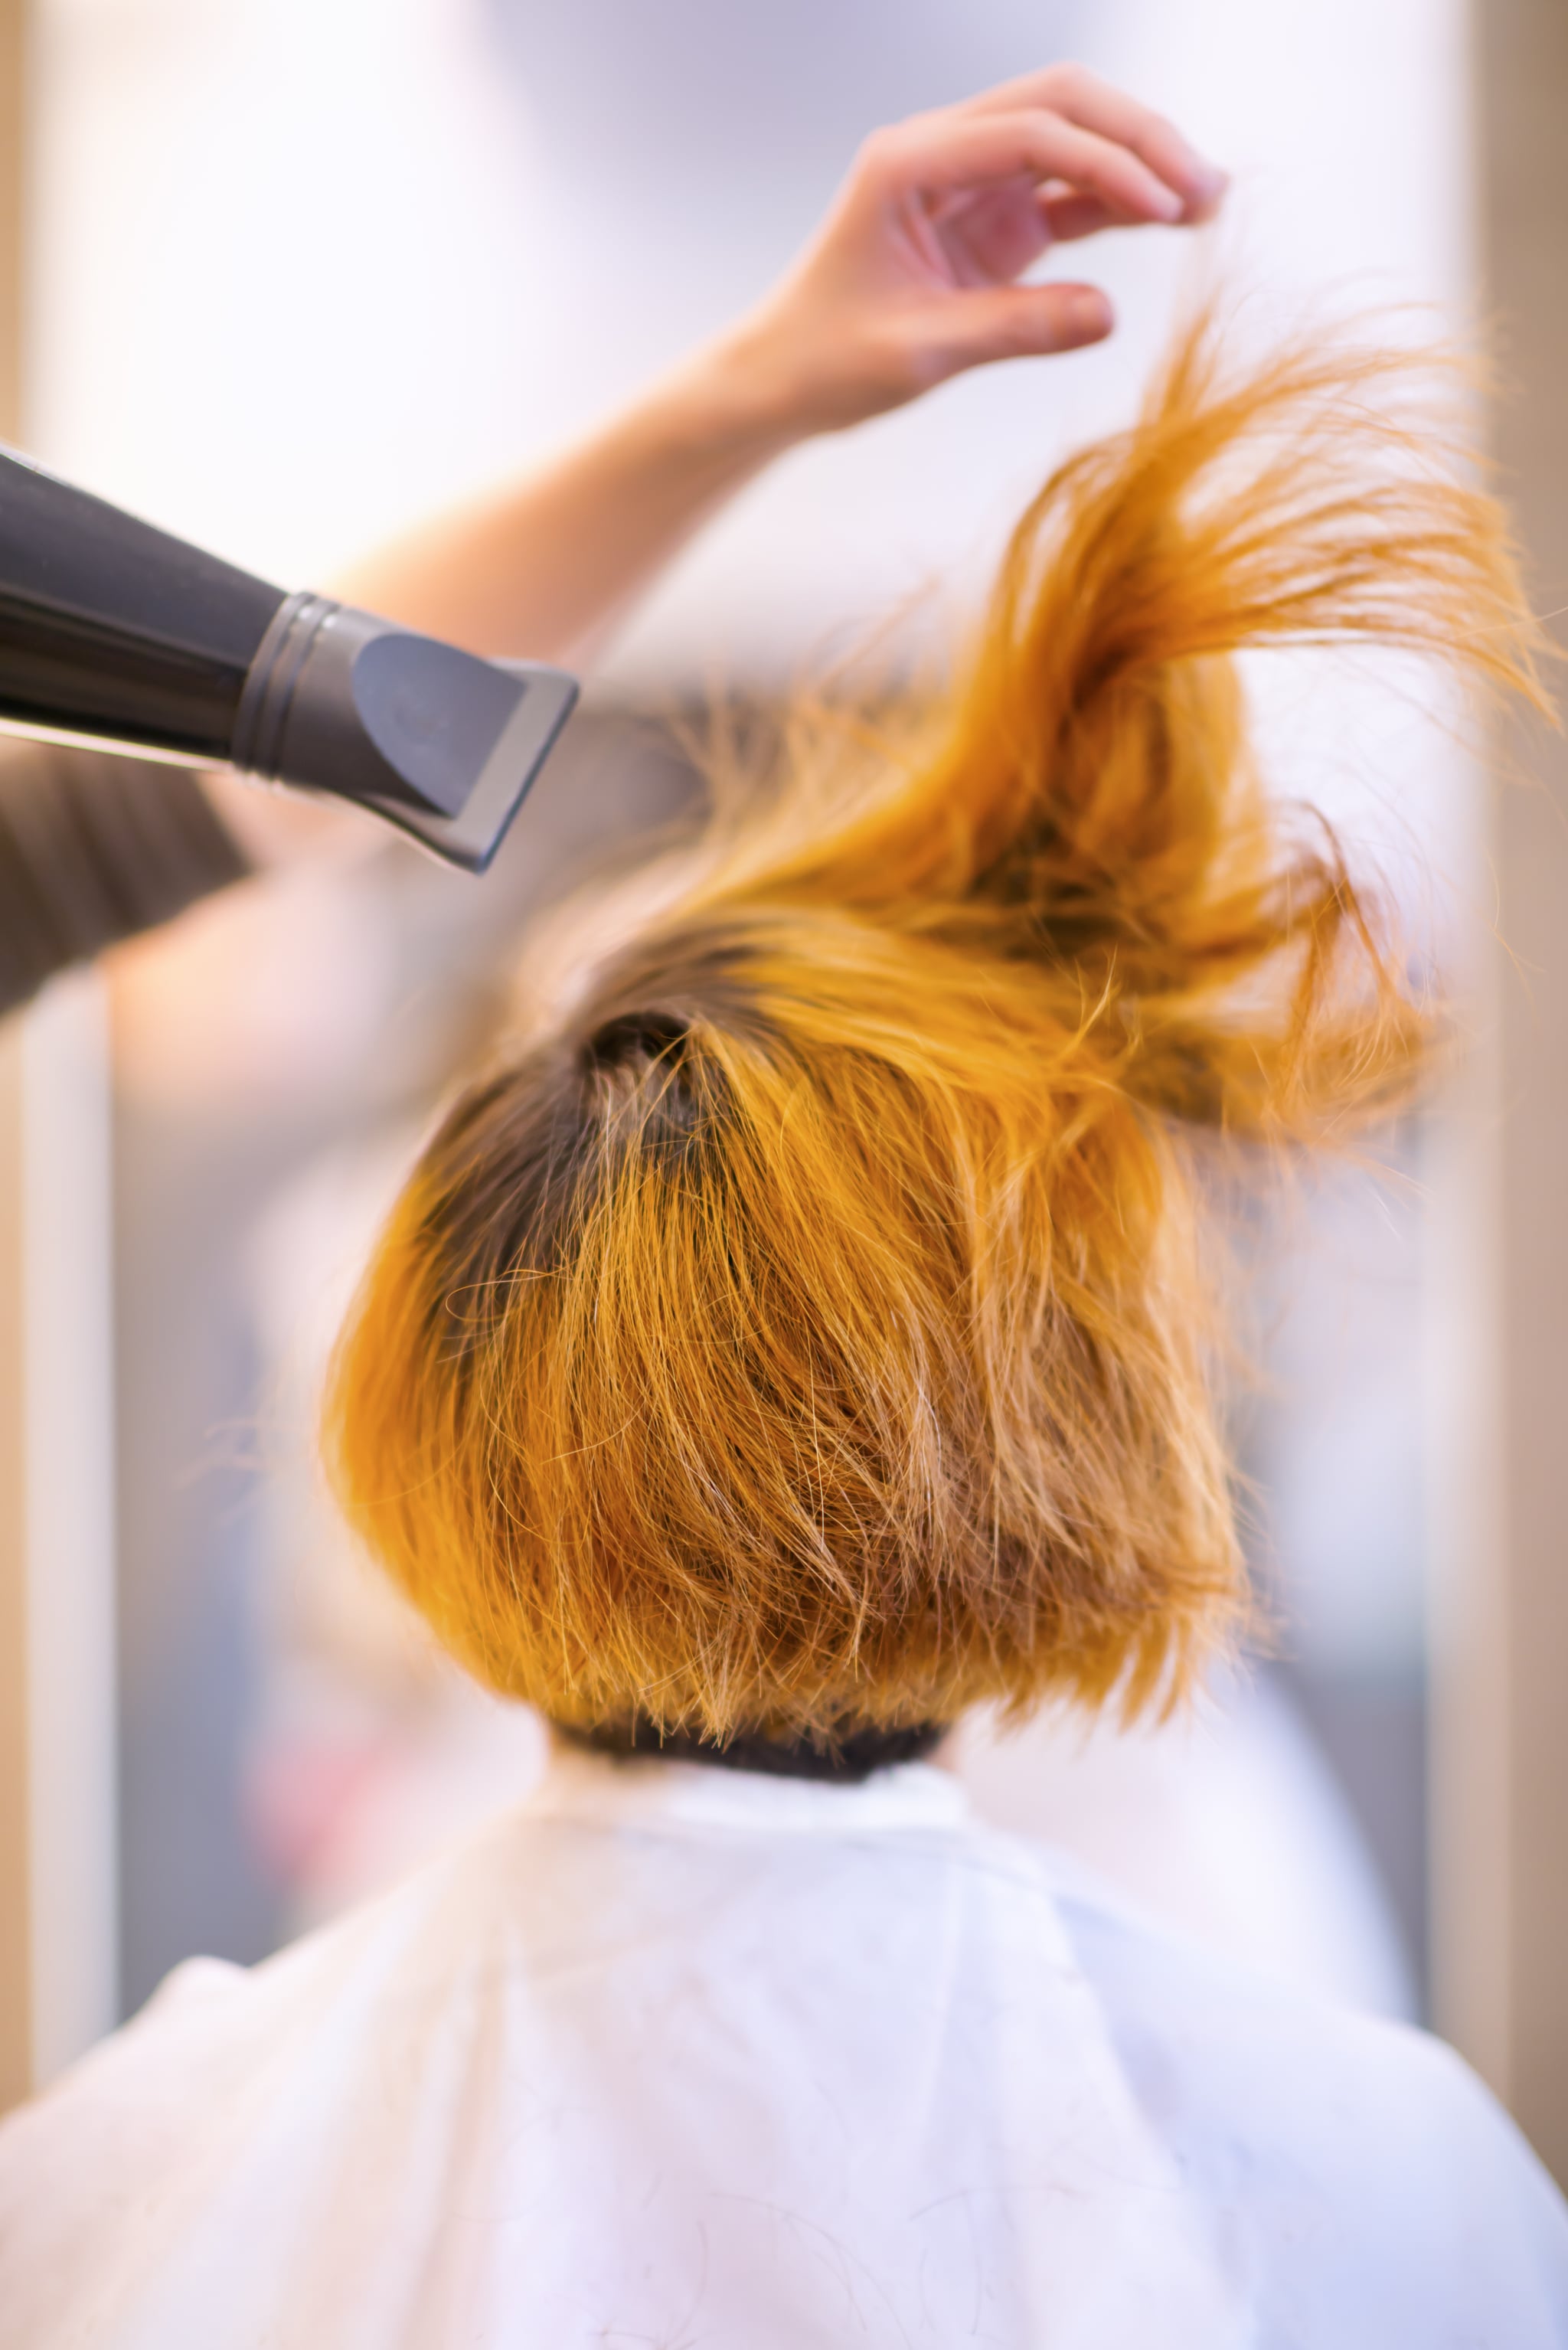 Are Blowouts at Hair Salons Not Safe Amid the Coronavirus? | POPSUGAR Beauty